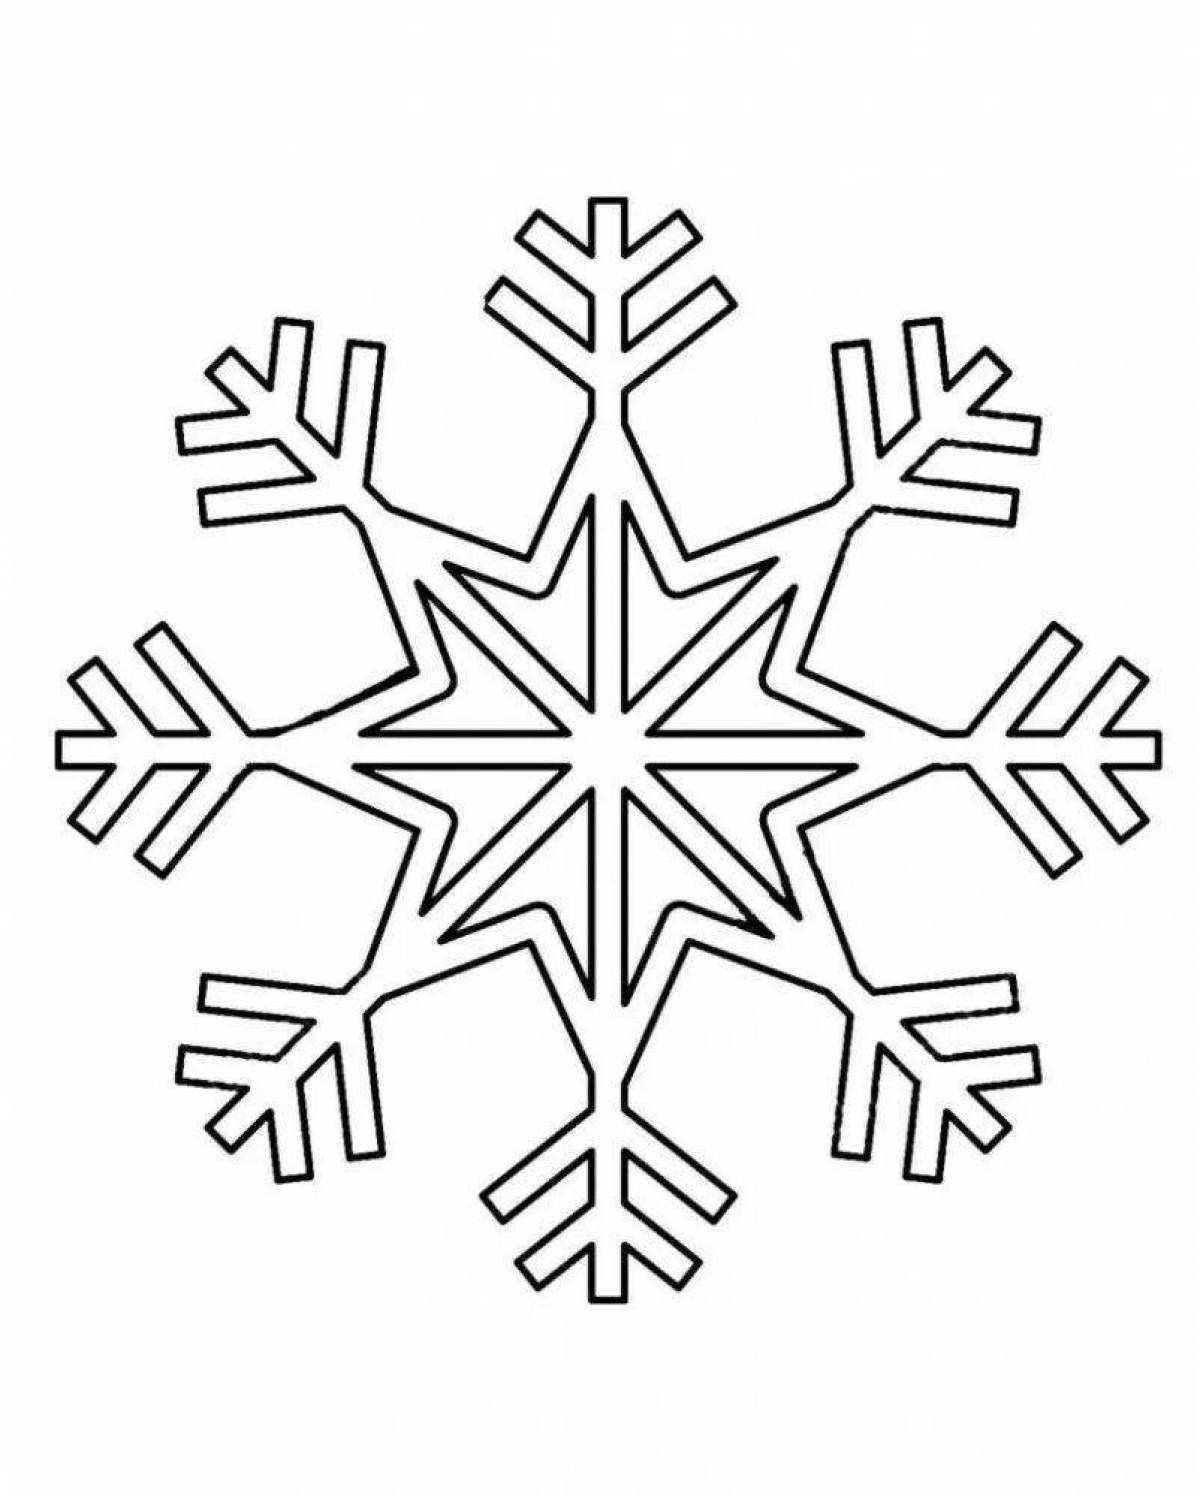 Cute snowflake coloring pages for 4-5 year olds in kindergarten